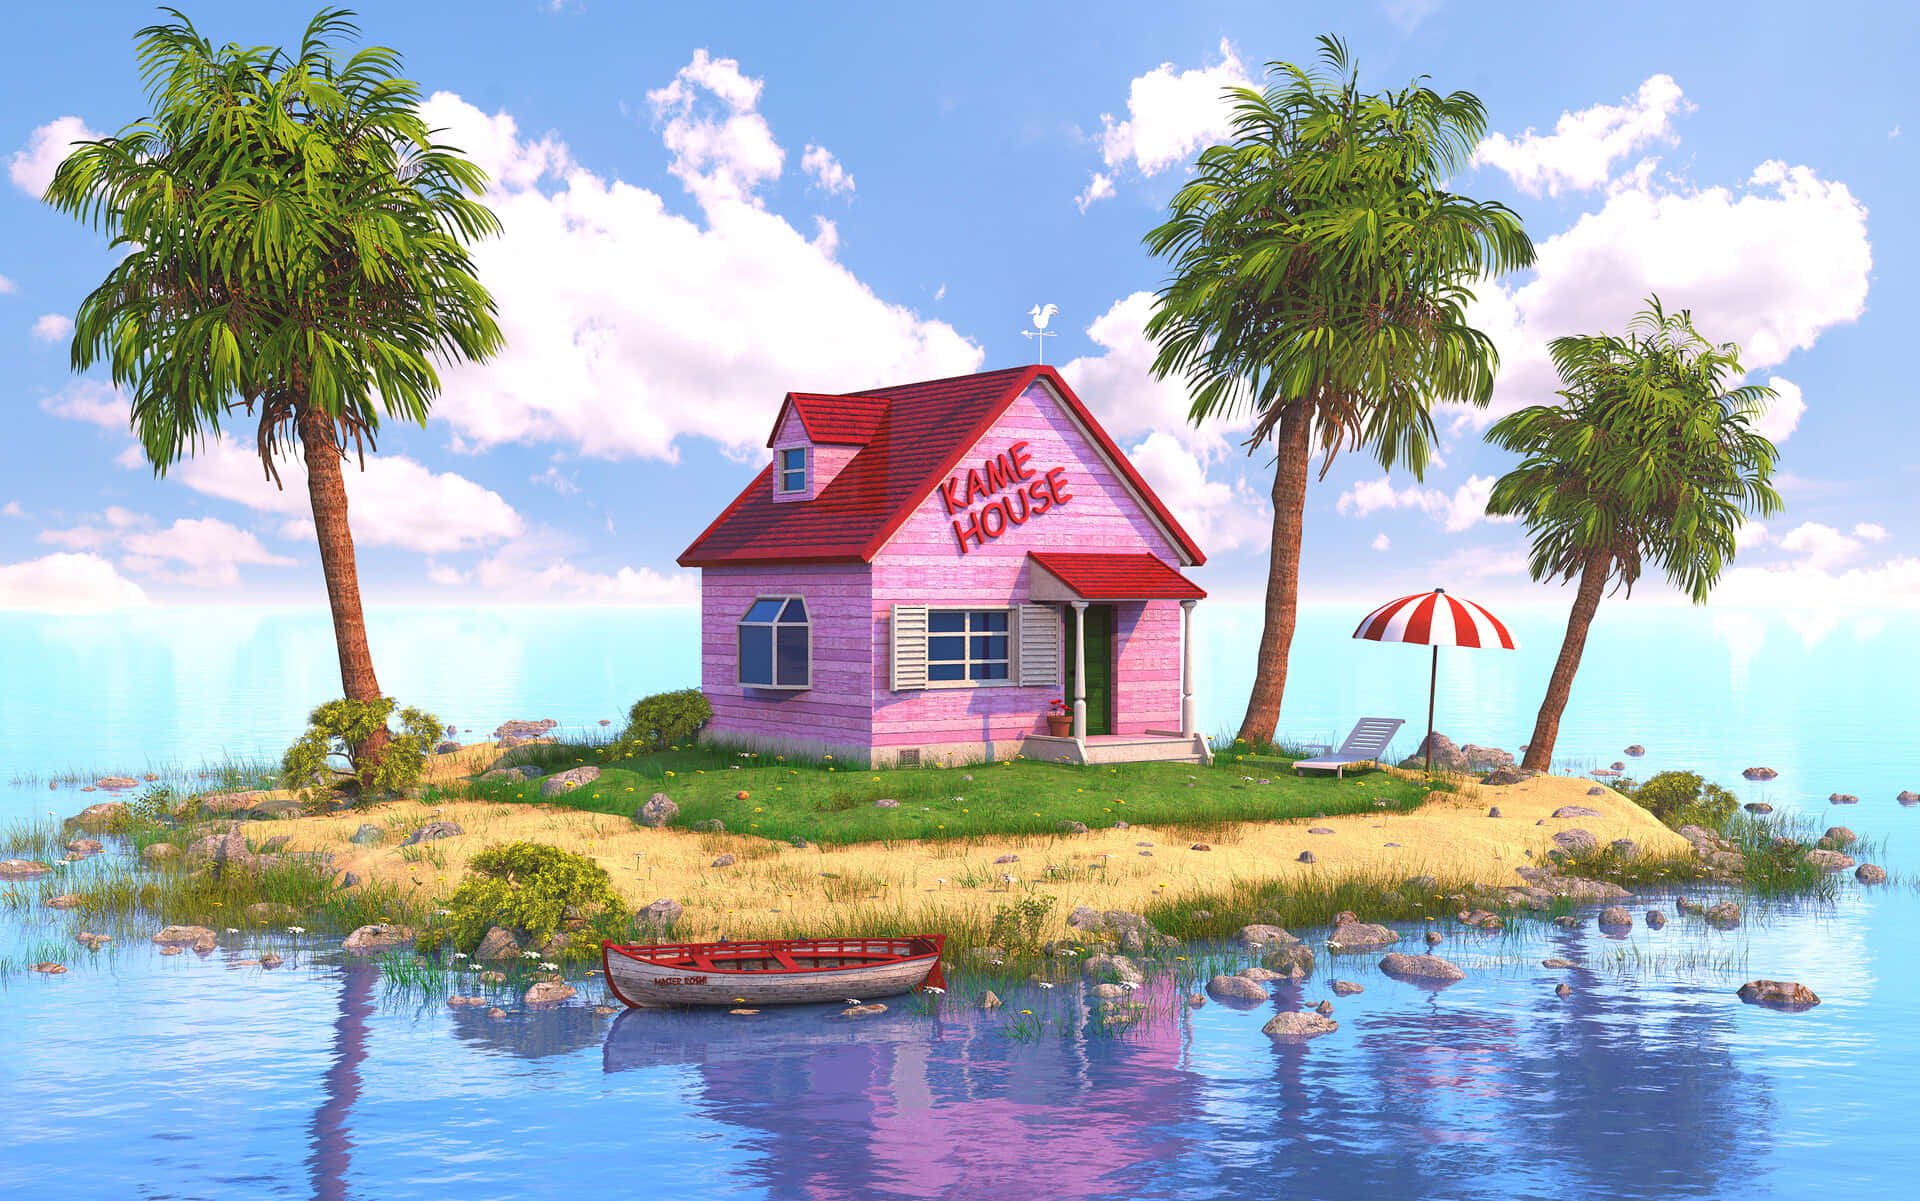 Enjoy the peaceful beauty of the Kame House Wallpaper